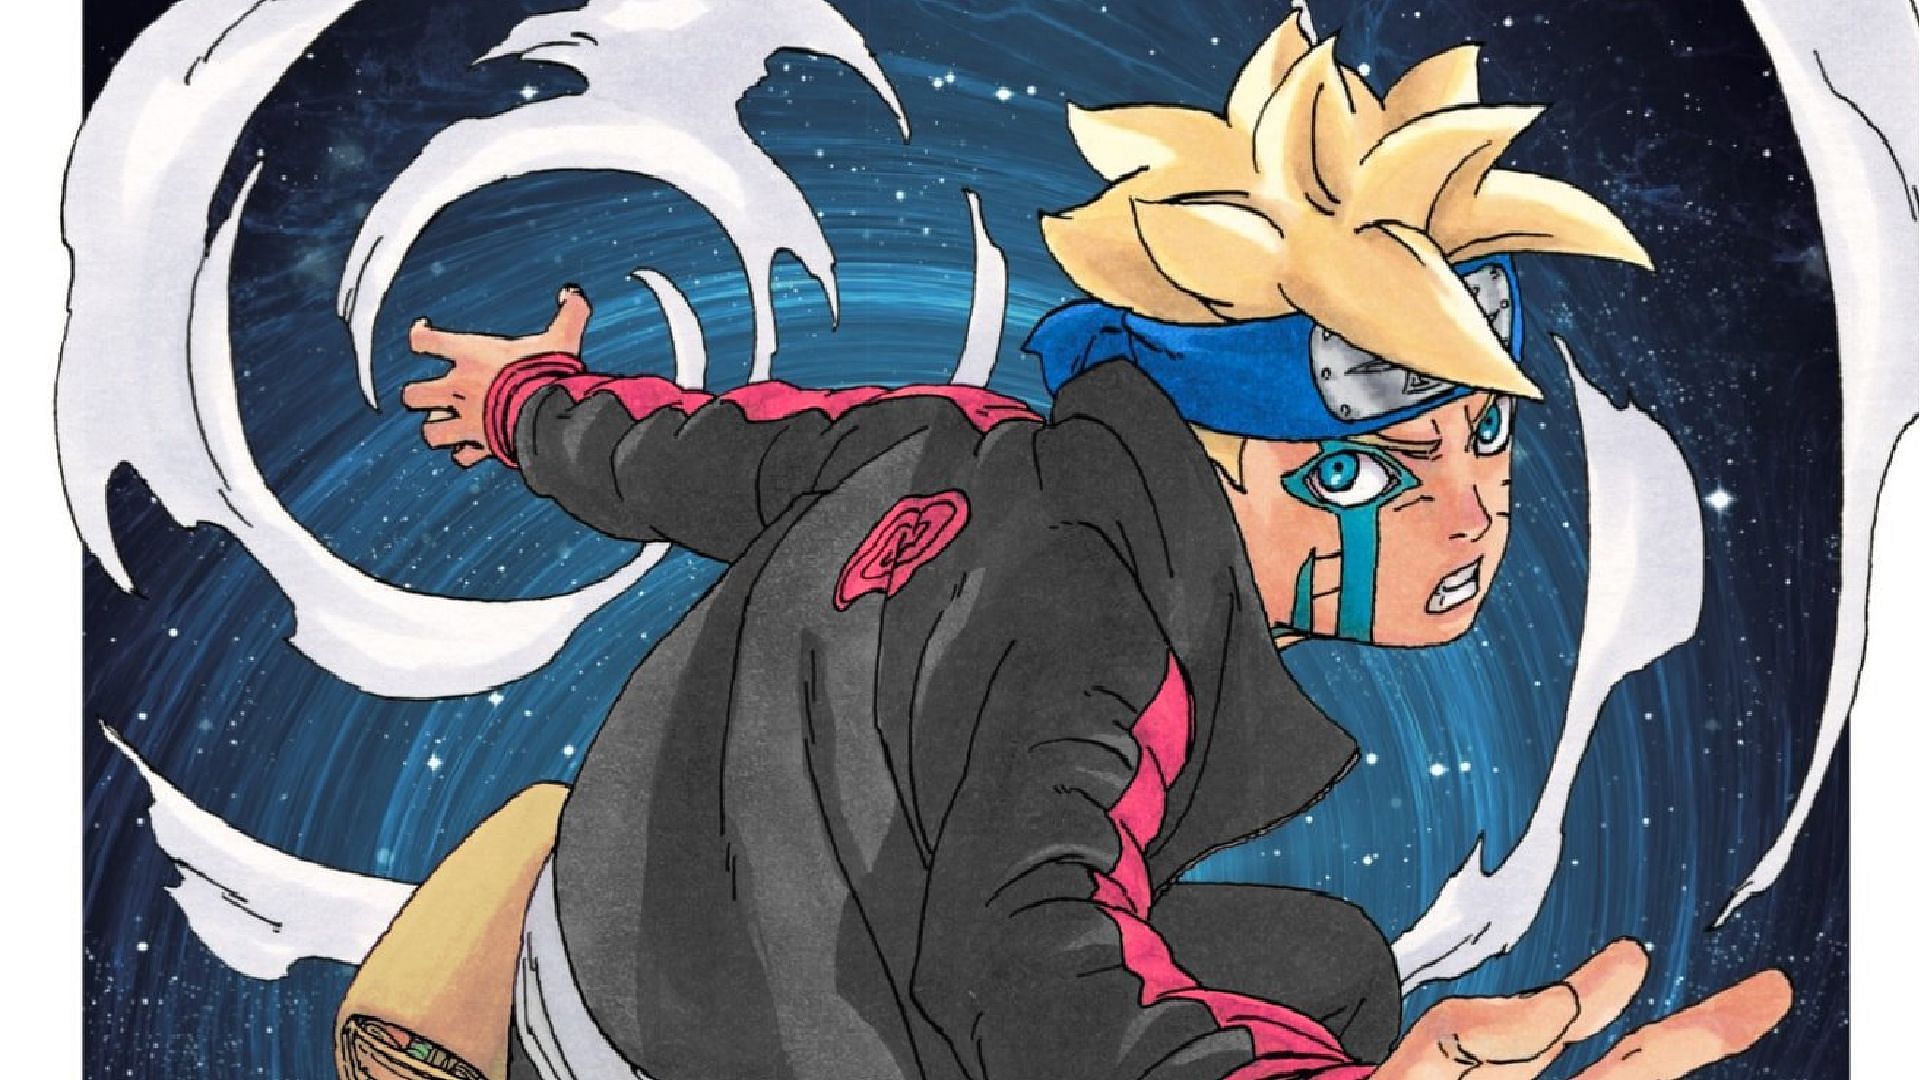 Boruto manga surpasses My Hero Academia after chapter 75, One Piece next in  line